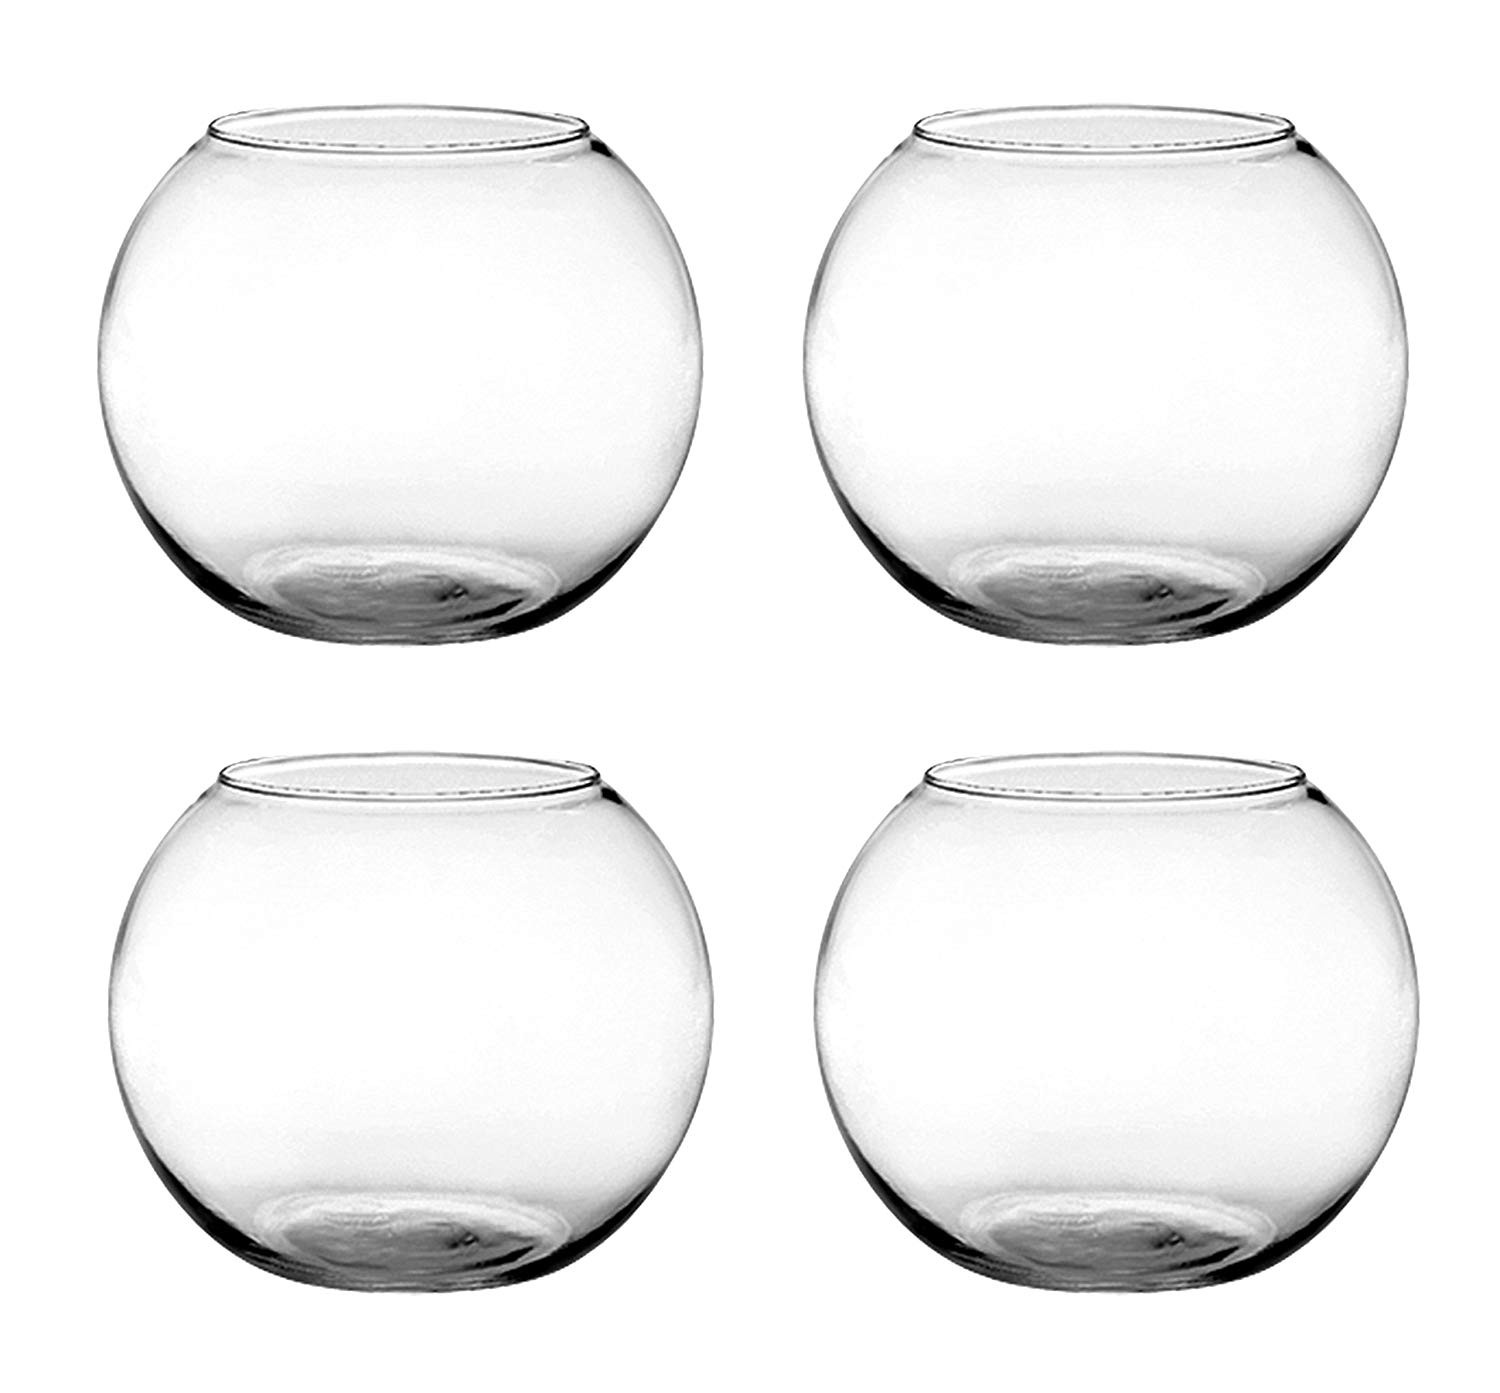 22 Stylish Low Cost Glass Vases 2022 free download low cost glass vases of amazon com set of 4 syndicate sales 6 inches clear rose bowl with amazon com set of 4 syndicate sales 6 inches clear rose bowl bundled by maven gifts garden outdoor